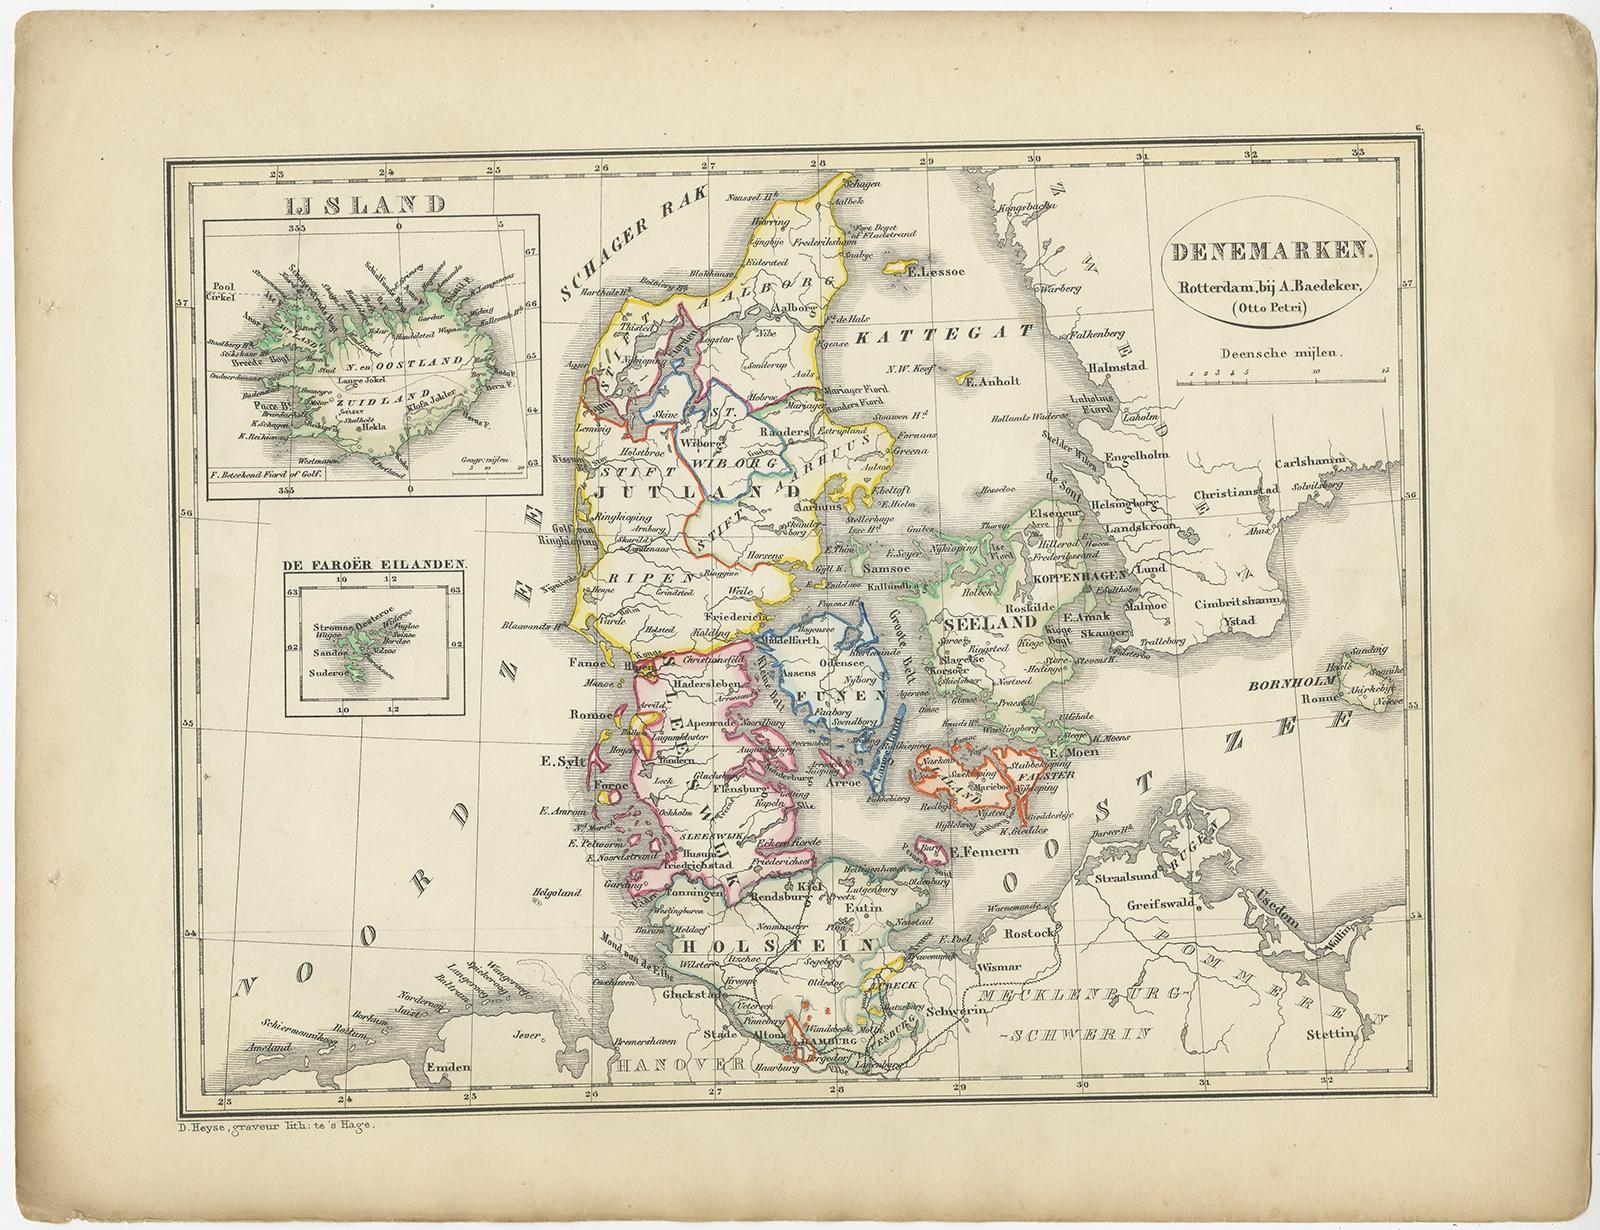 Antique map titled 'Denemarken'. Map of Denmark, with a small inset map of Iceland. This map originates from 'School-Atlas van alle deelen der Aarde' by Otto Petri. 

Artists and Engravers: Published by A. Baedeker (Otto Petri).

Condition: